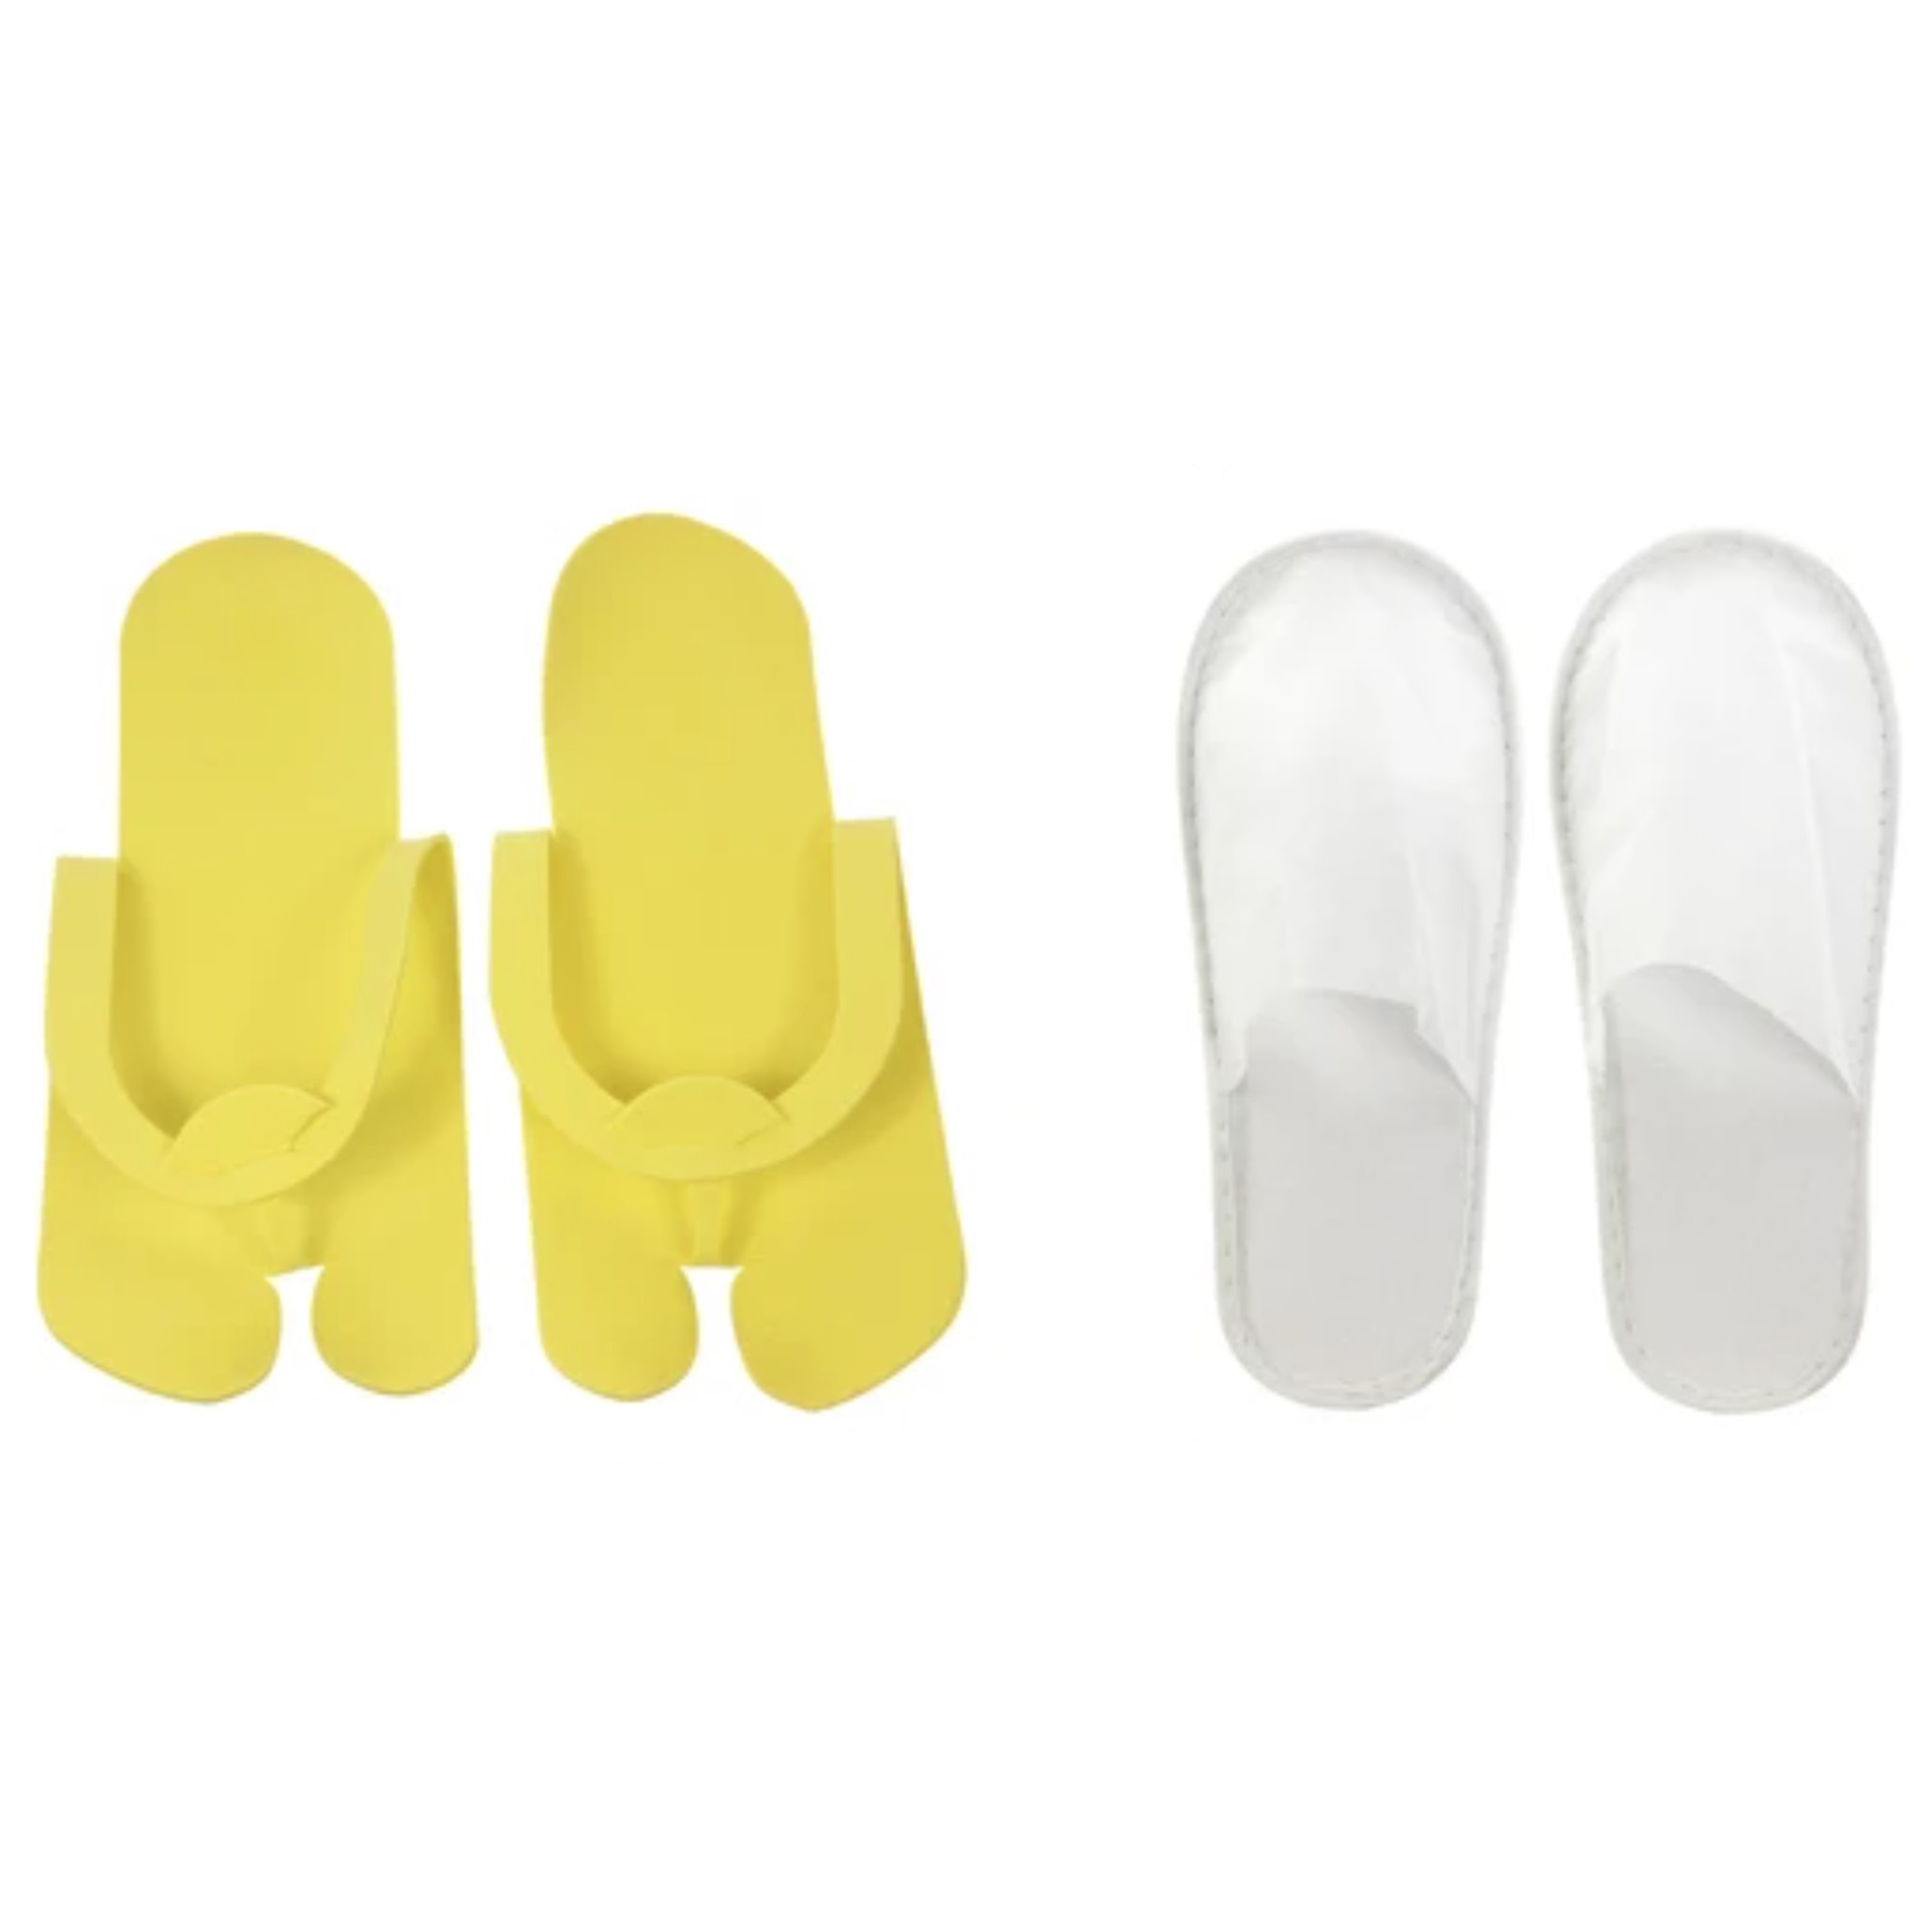 Hygiene and Safety/DISPOSABLE NONWOVEN HYGIENE SUPPLIES/Hygiene Disposable Slippers